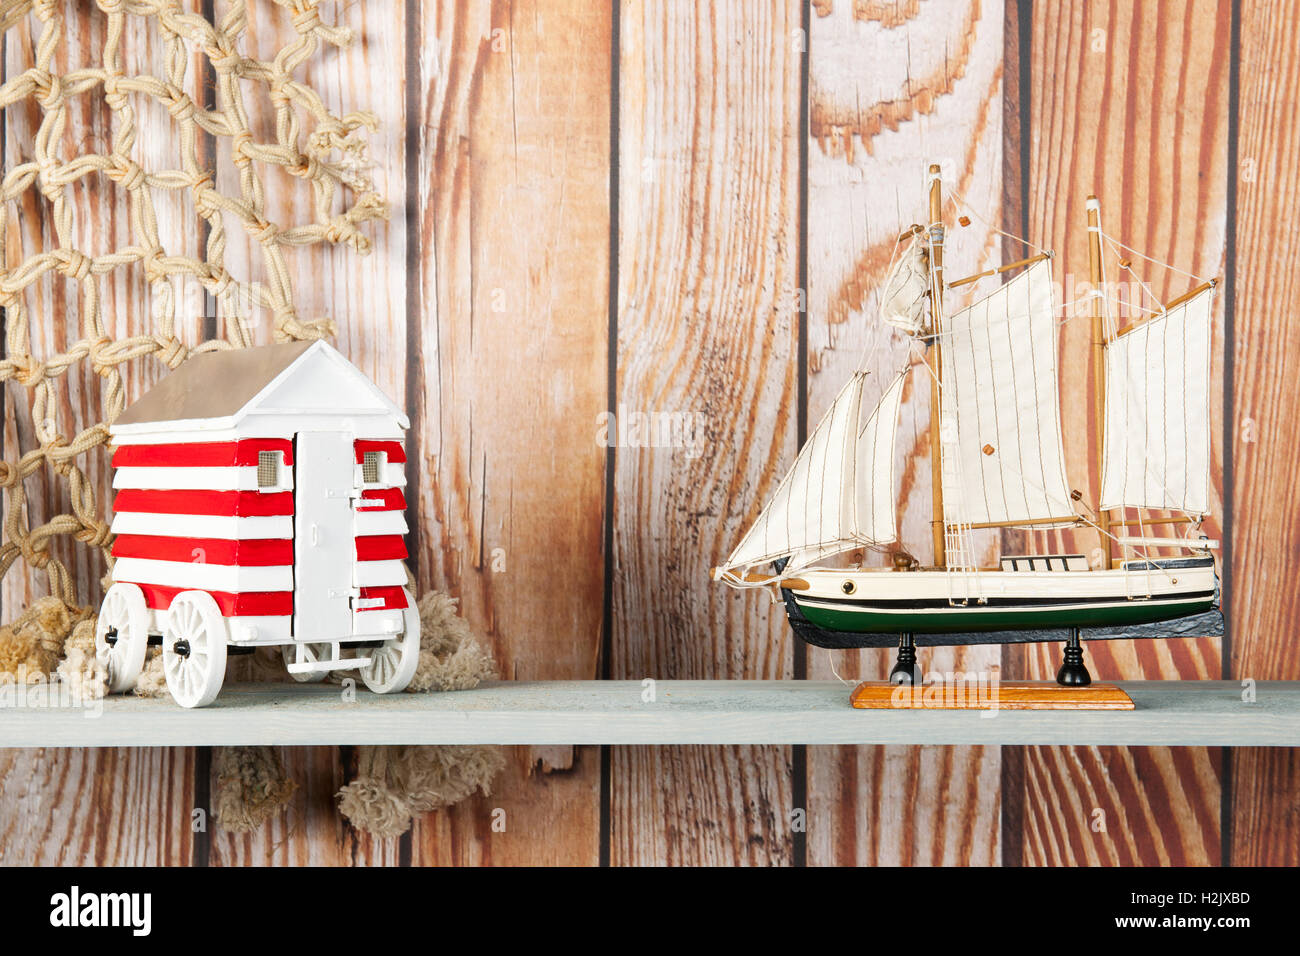 model, ship, ornament, wood, handicraft, souvenir, small, toy, detailed,  miniature, water, ocean, fishing, net, boat, collector Stock Photo - Alamy